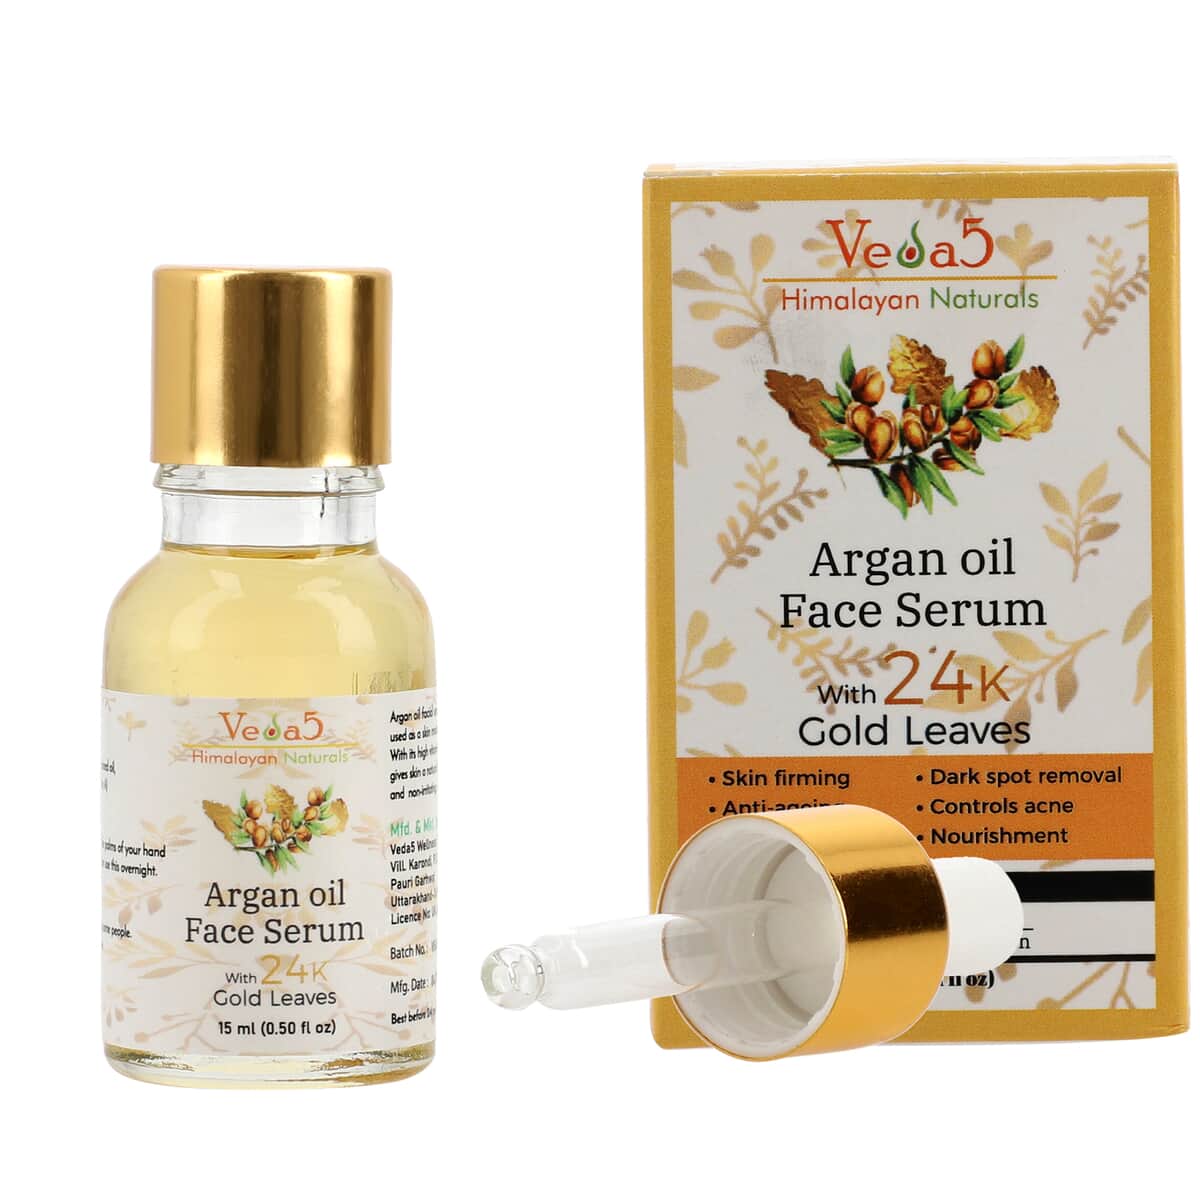 Veda5 Himalayan Naturals Argan Oil Face Serum with 24K Gold Leaves 15ml image number 6